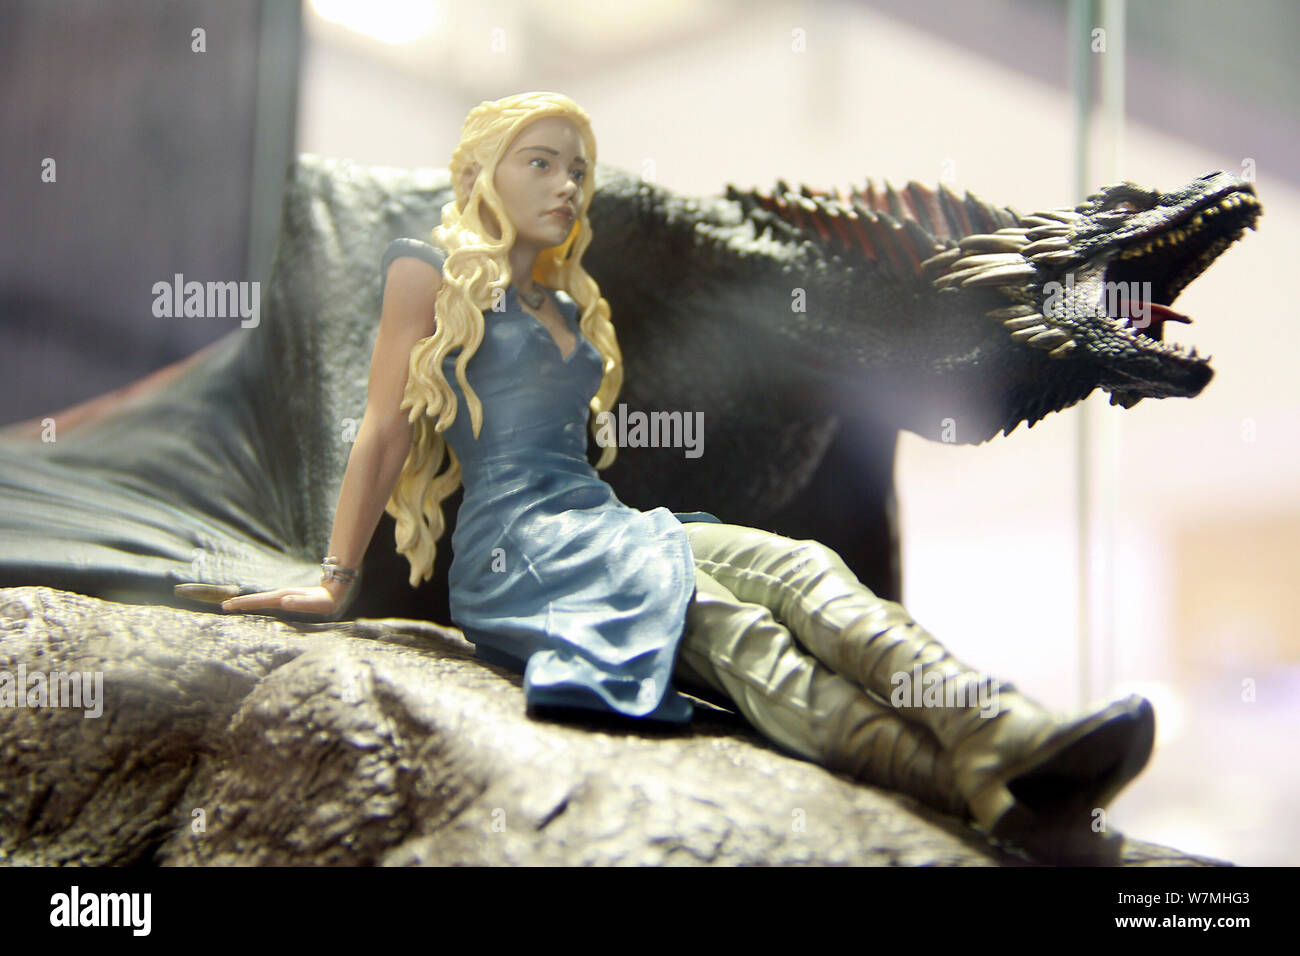 View of a replica of Princess Rhaenys Targaryen displayed during the Touring Exhibition of ''Games of Thrones'' at Plaza 66 shopping mall in Shanghai, Stock Photo